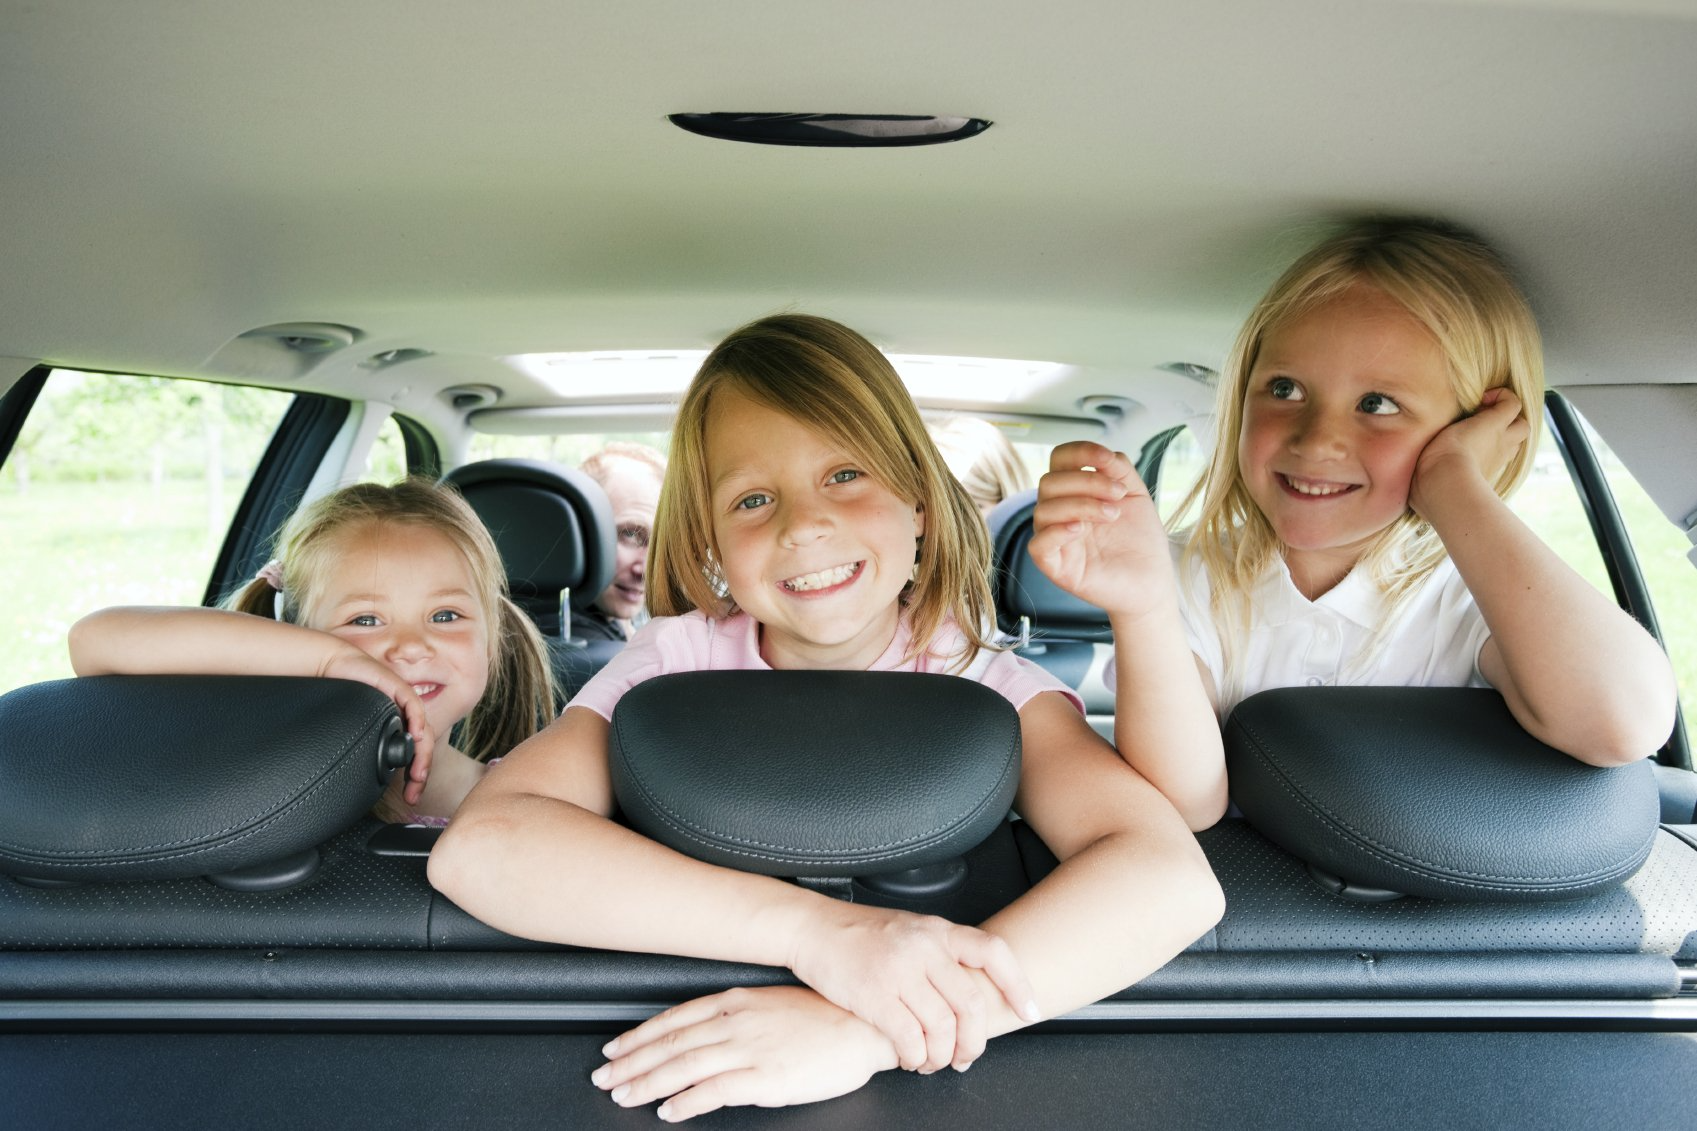 Transfers to Protur Alicia Hotel with car baby seats